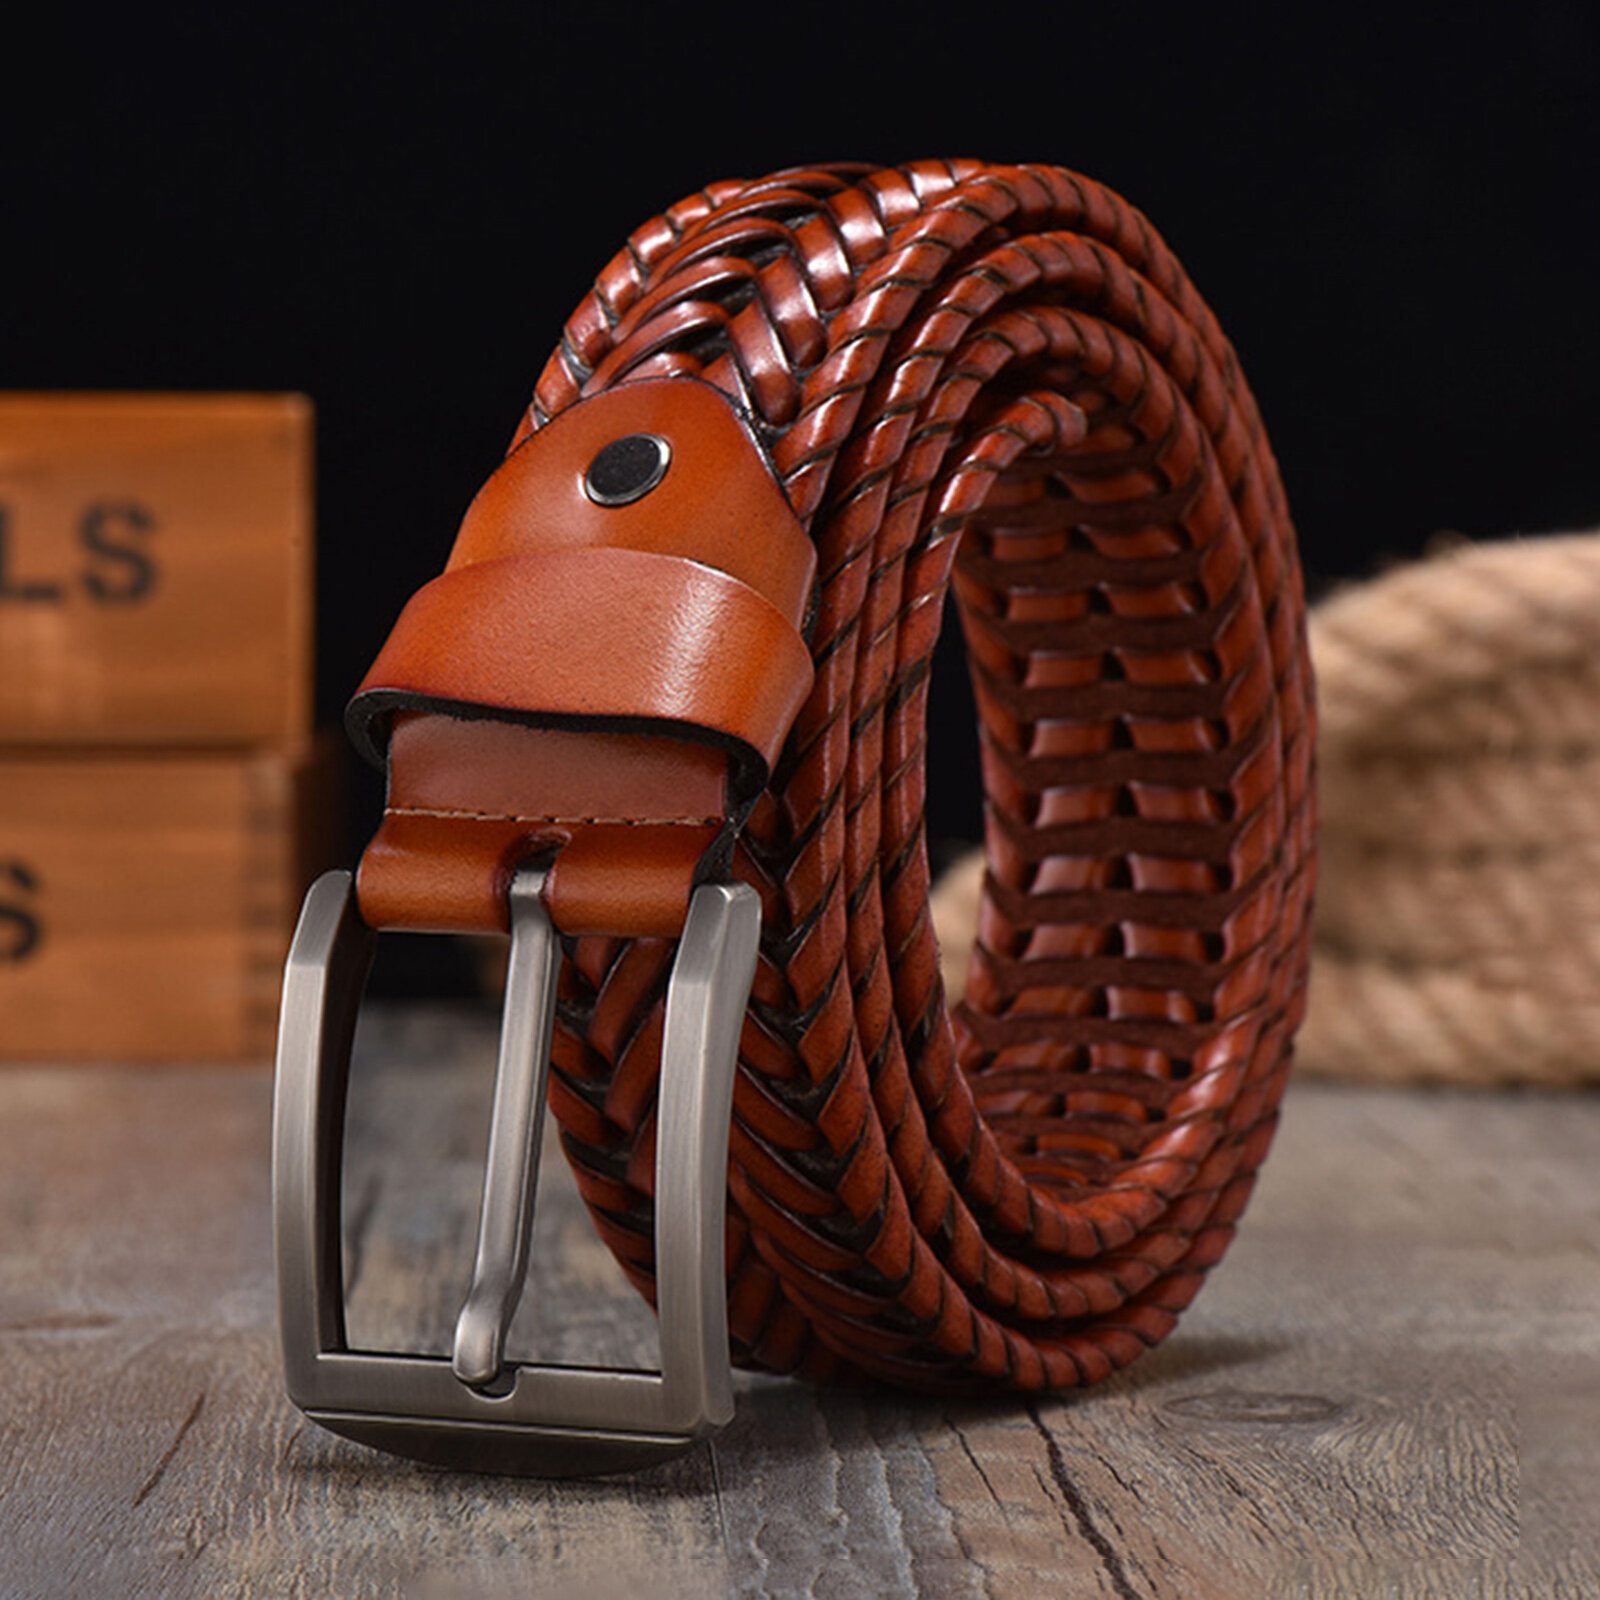 JASSY 110-125cm Breathable Men's Leather Vintage Casual Pin Buckle Woven Hollow Belt